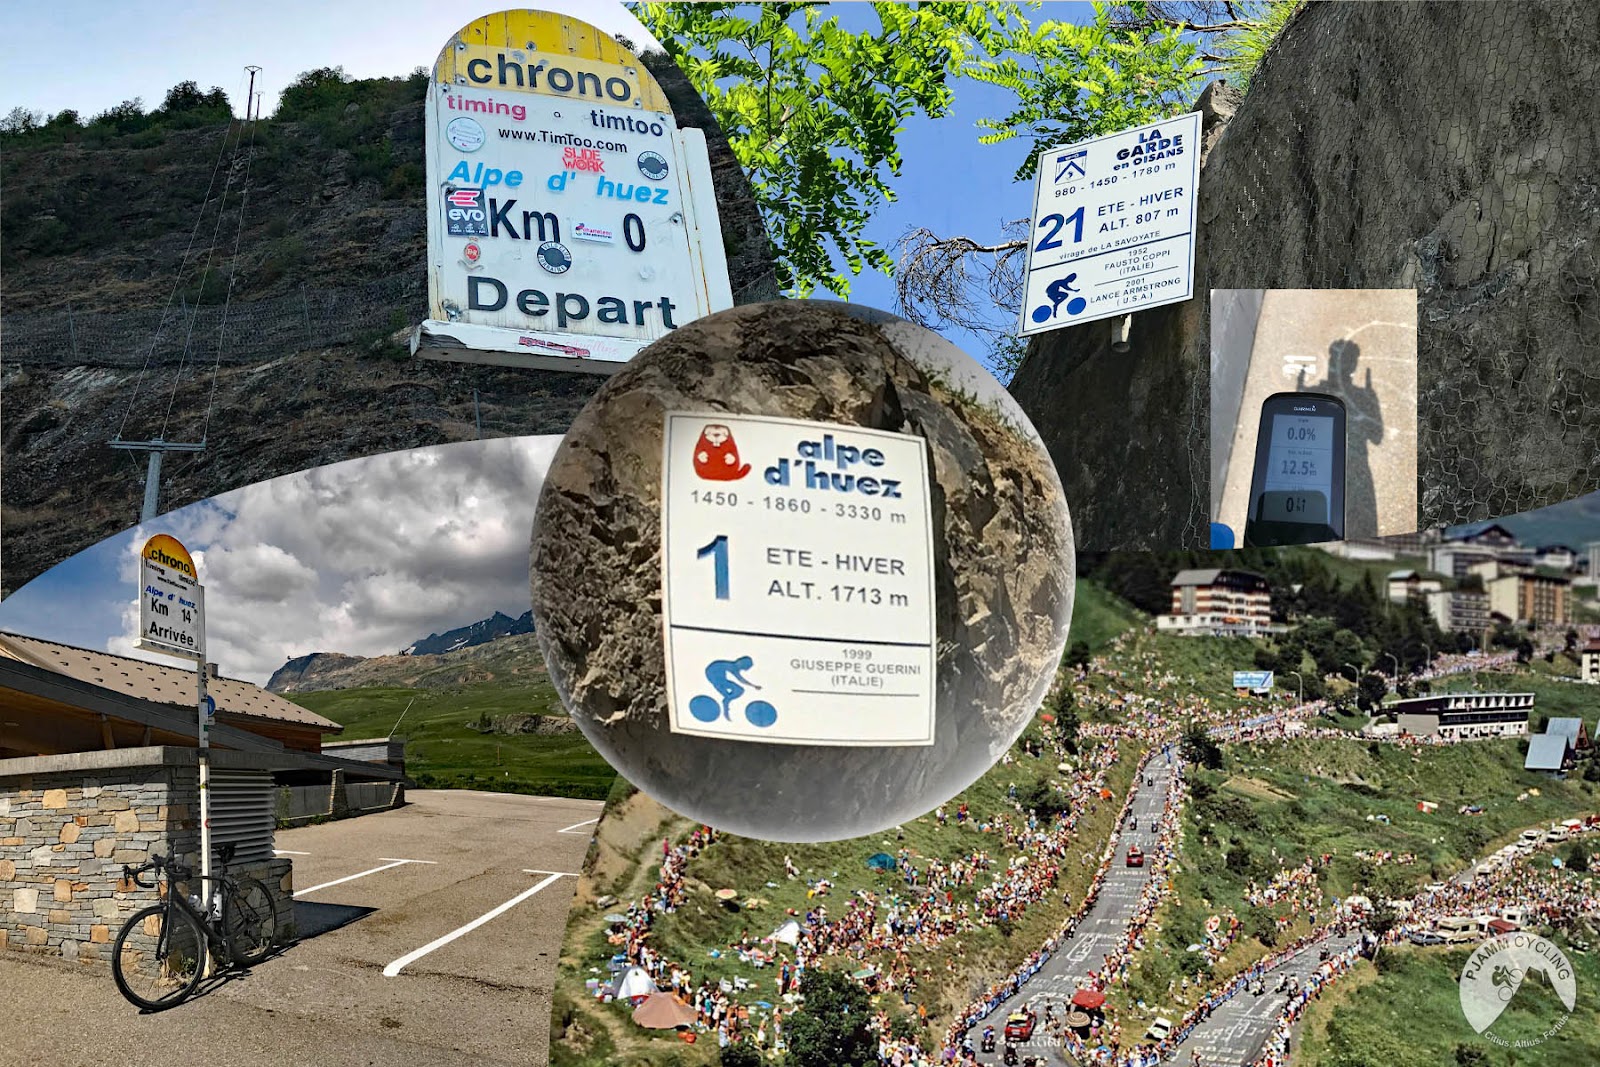 photo collage shows signs for Alpe d'Huez, KM marker at climb start, aerial drone view shows finish of climb